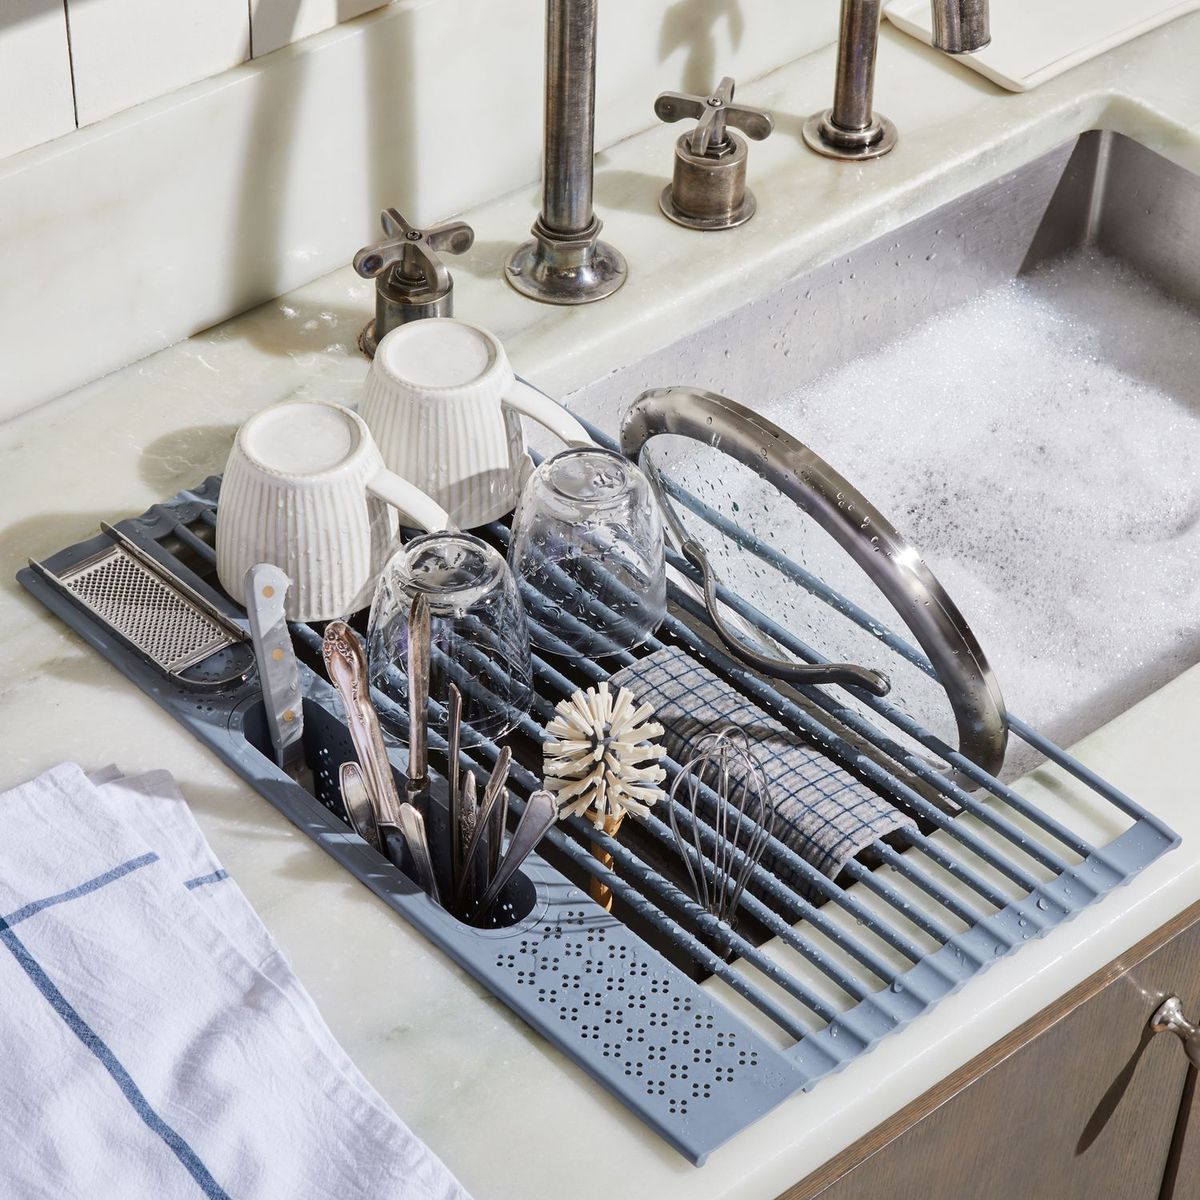 https://hips.hearstapps.com/hmg-prod/images/food52-five-two-over-the-sink-dish-drying-rack-1674848583.jpeg?crop=1.00xw:1.00xh;0,0&resize=1200:*